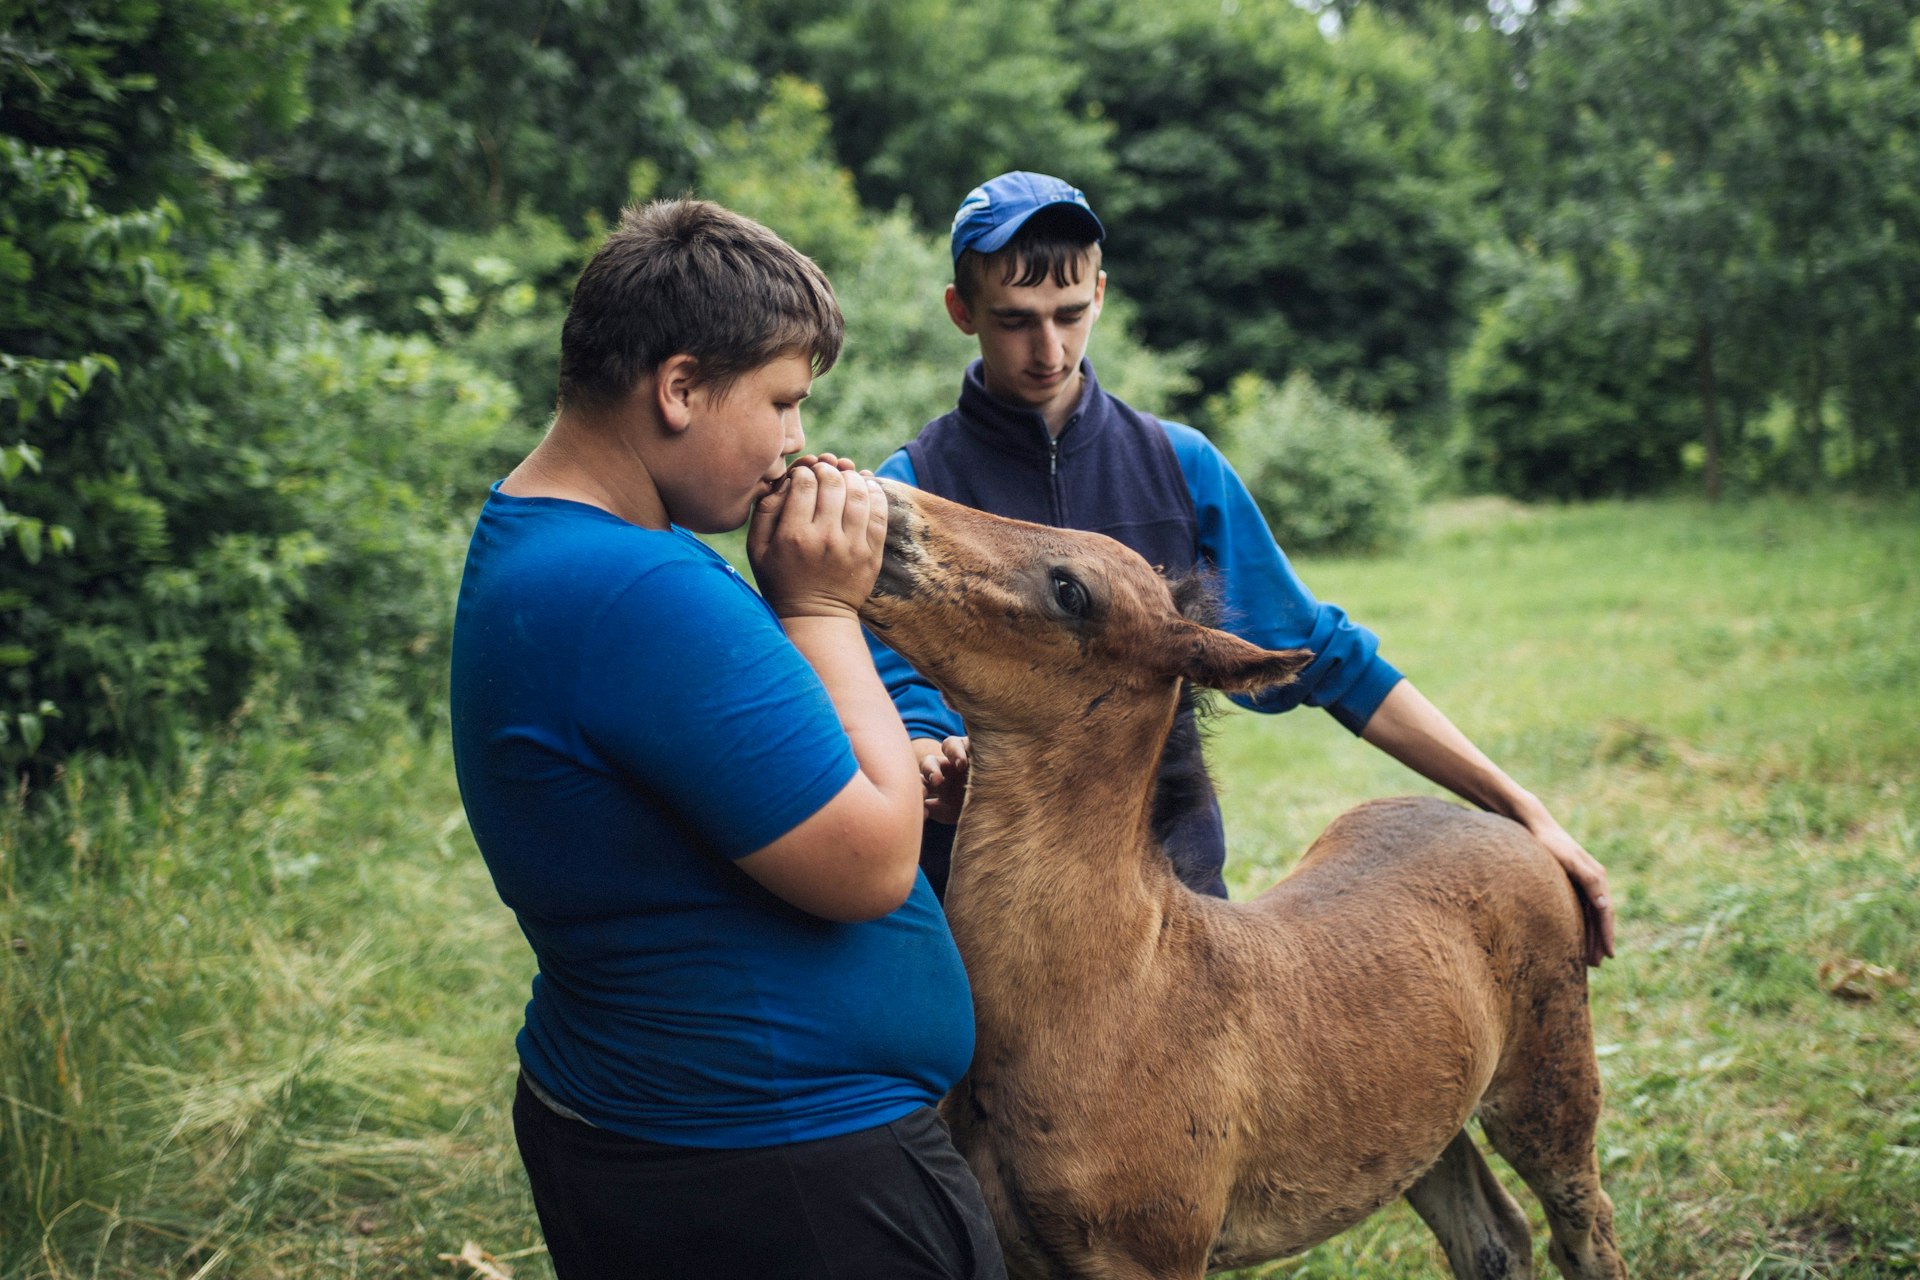  Maxim and Vasya embrace a newborn foal as it stands for the  rst time. In Rotar village, horses are considered key to country living – not just for farm work but as a means of transportation.